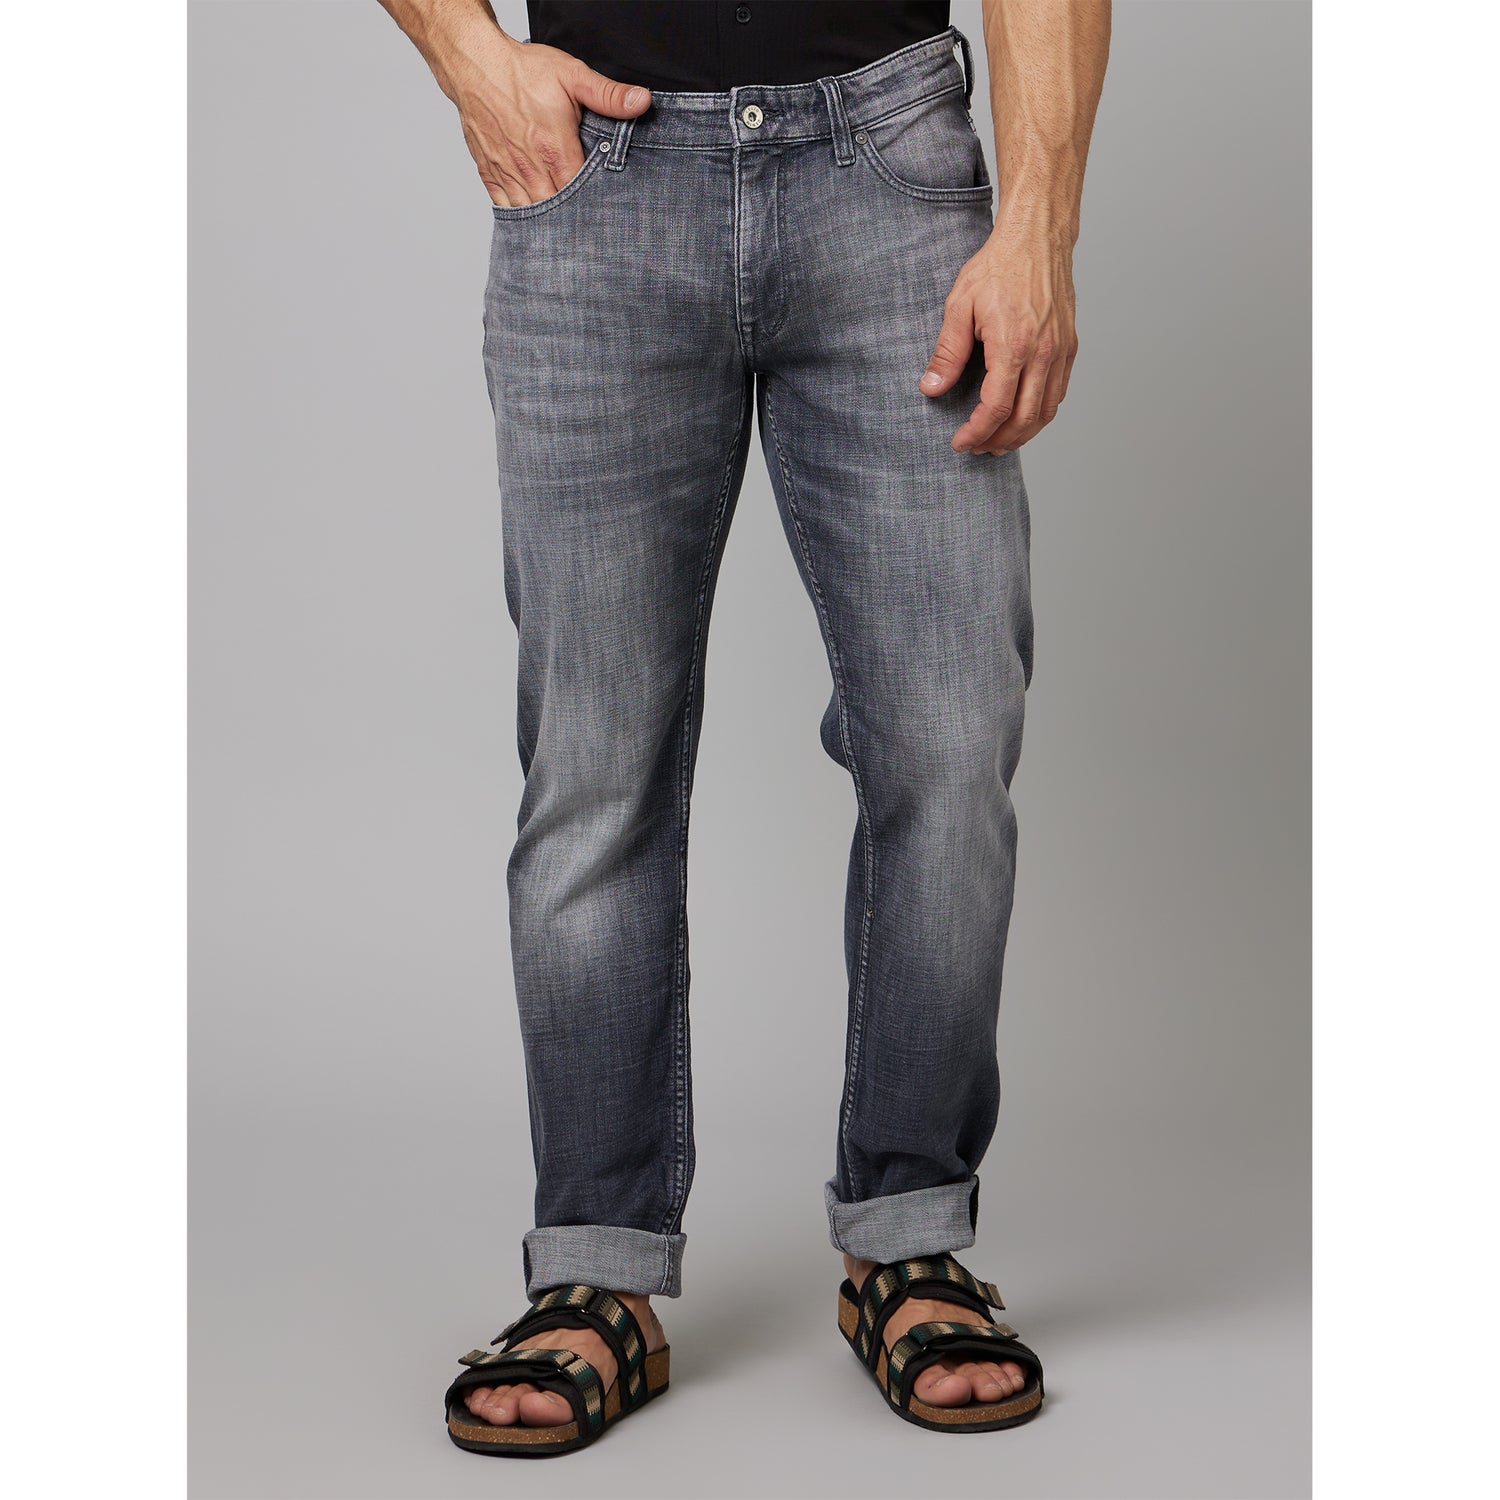 Grey Relaxed Fit Heavy Fade Clean Look Stretchable Jeans (DOGENSOFT)